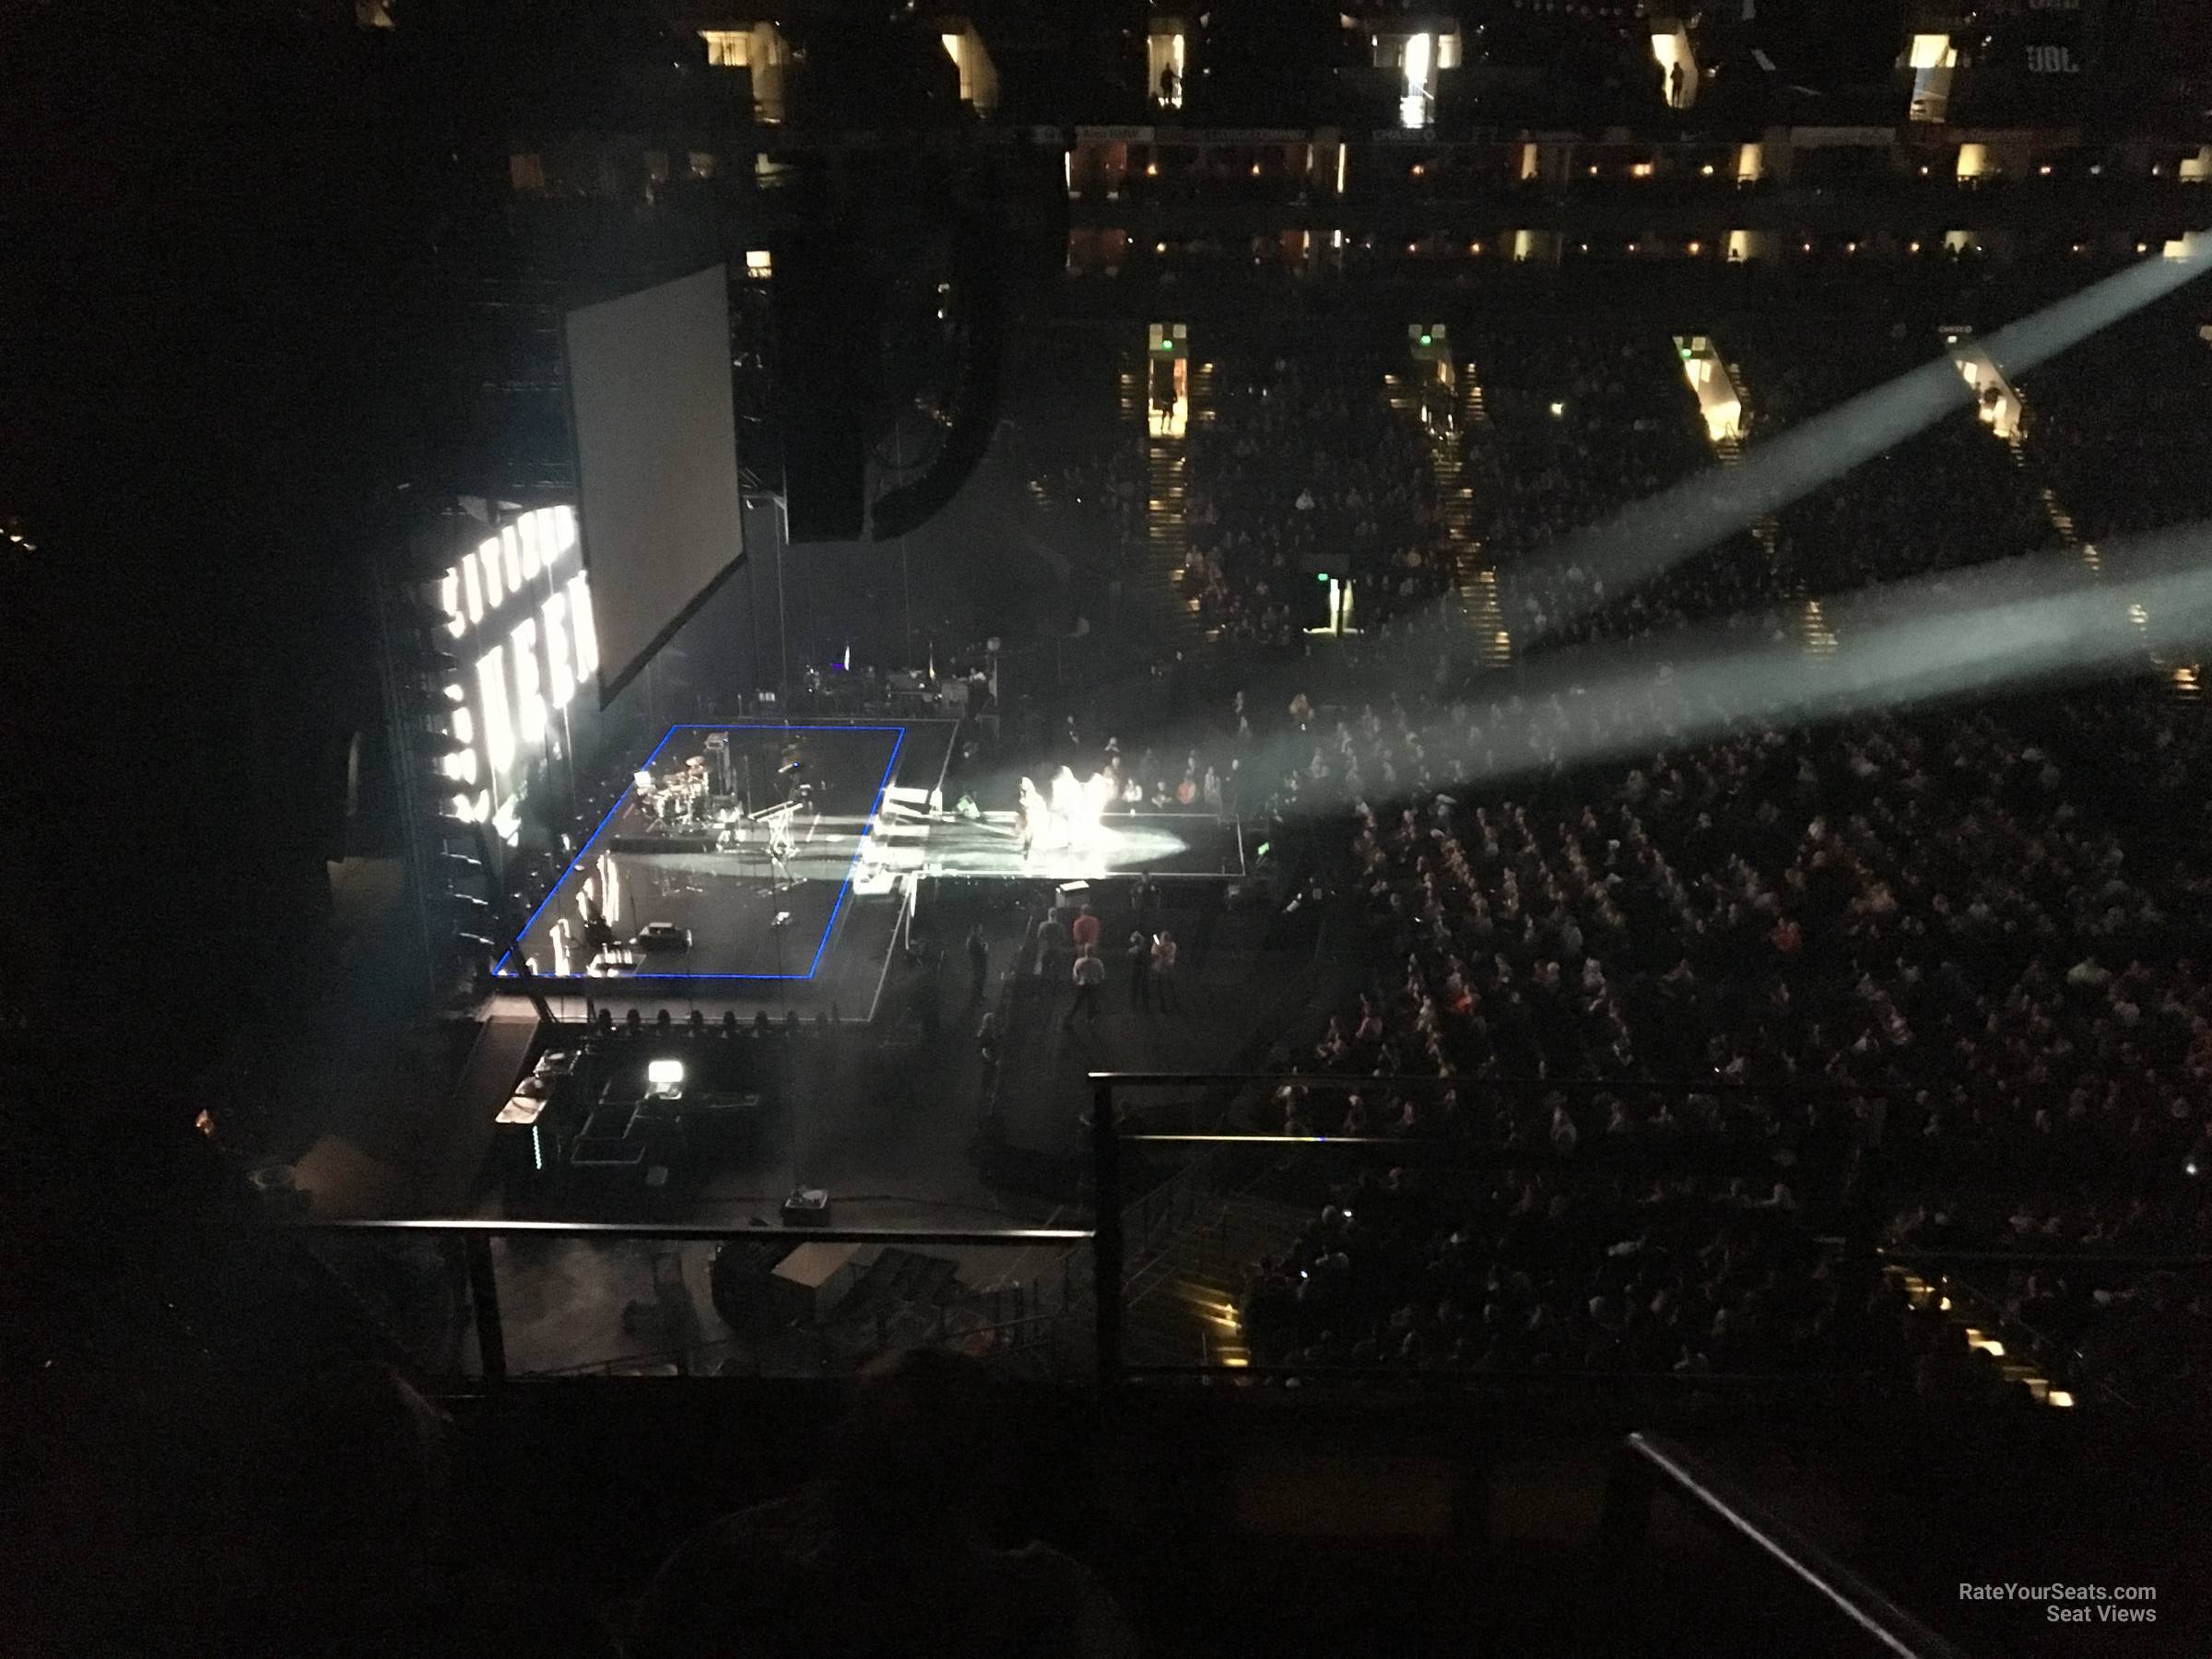 section 219, row 3 seat view  - oakland arena